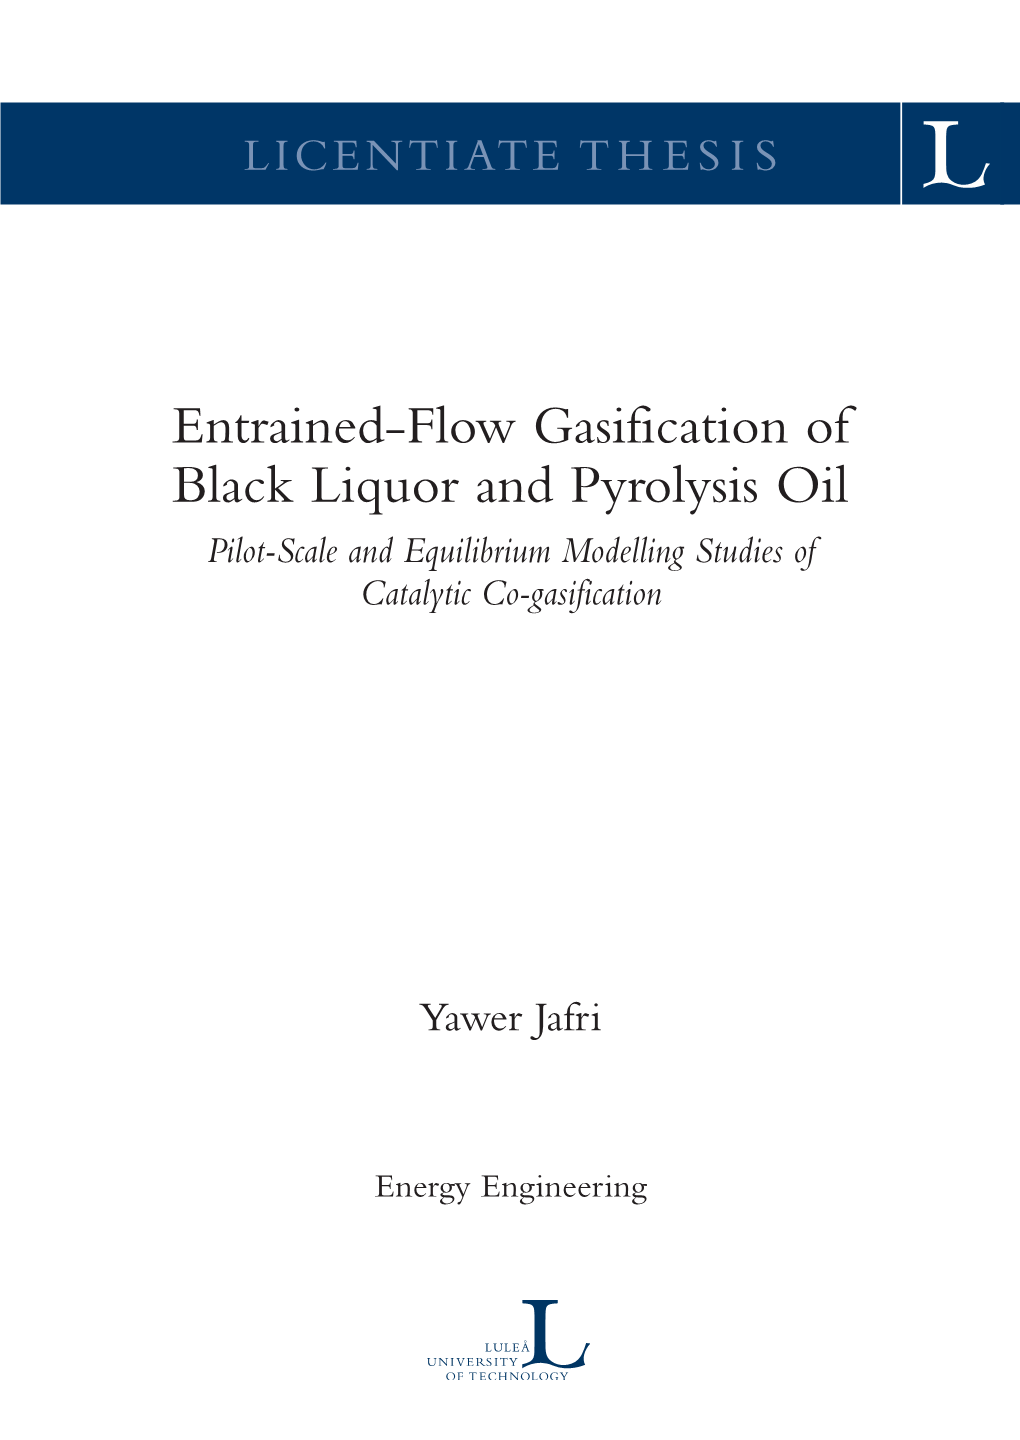 Entrained-Flow Gasification of Black Liquor and Pyrolysis Oil